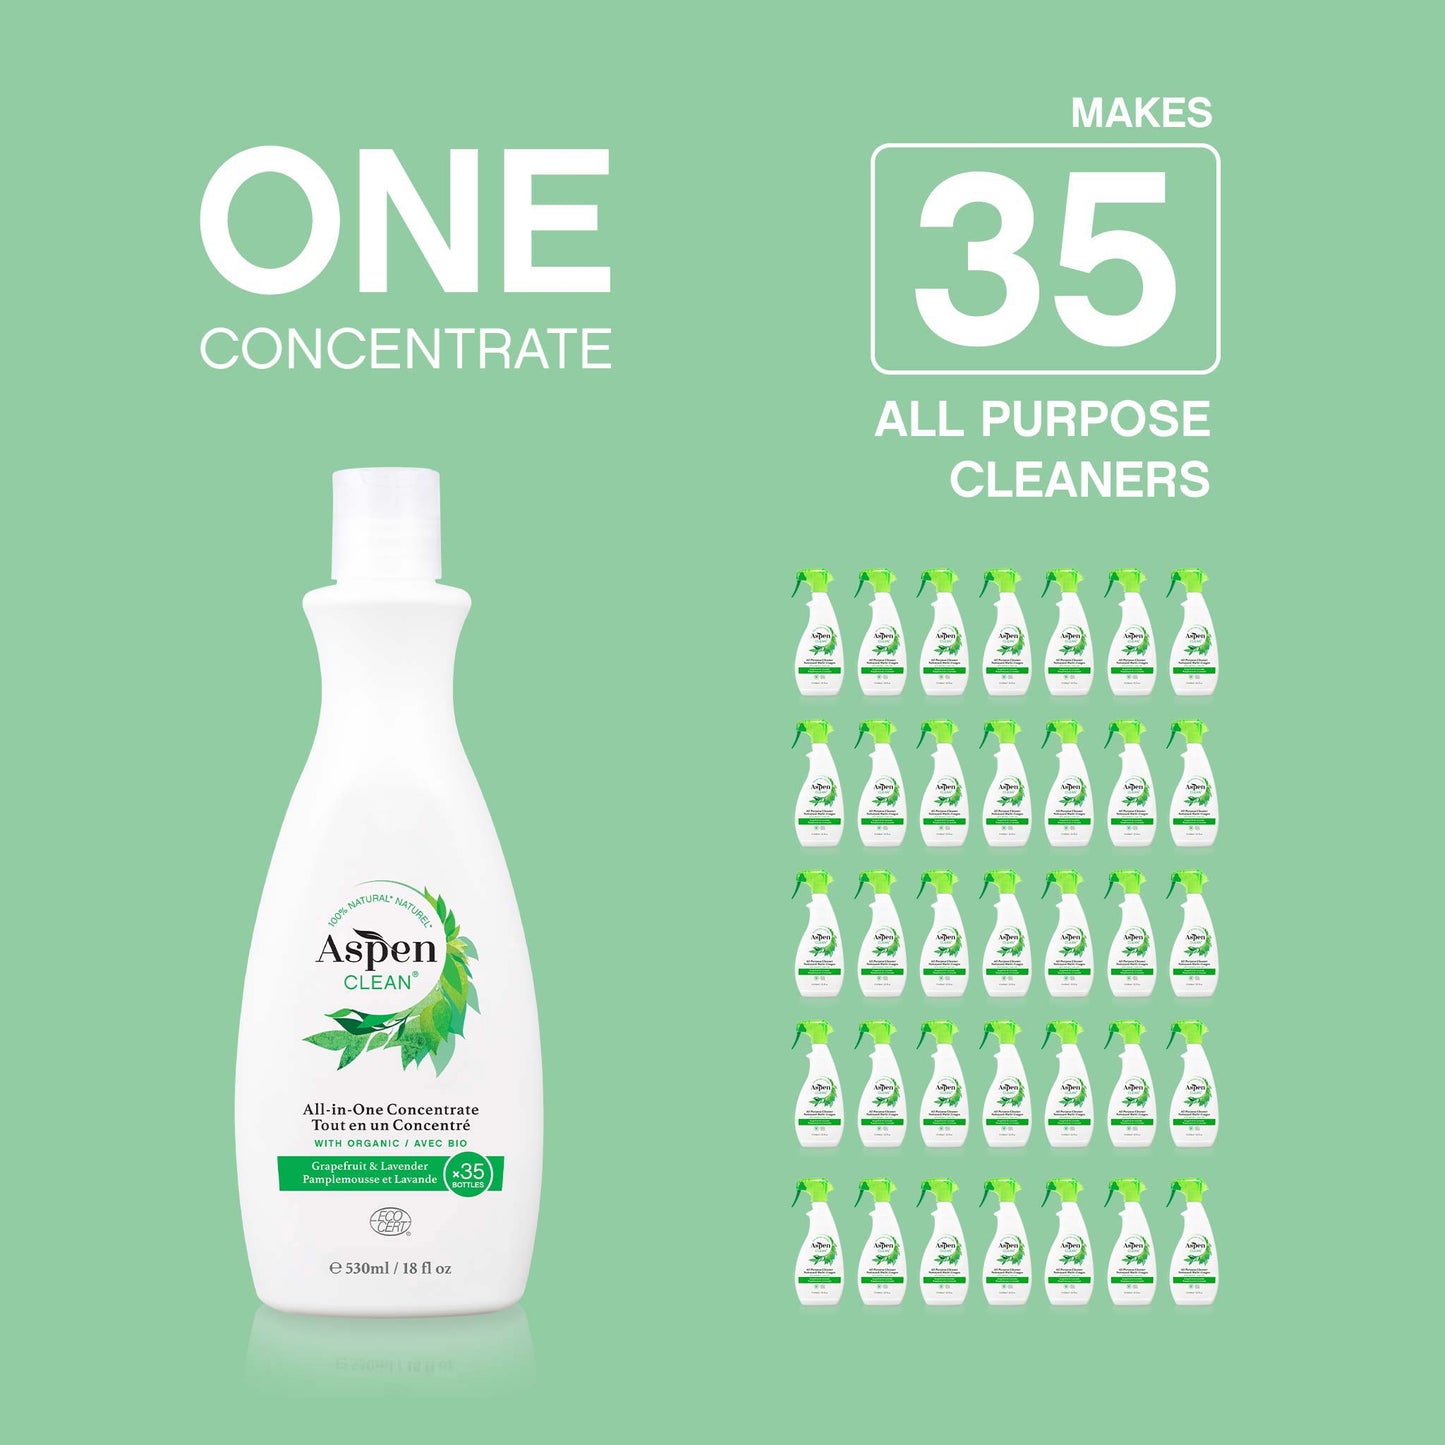 Natural All-In-One Cleaner Concentrate. one concentrate makes 35 regular cleaners